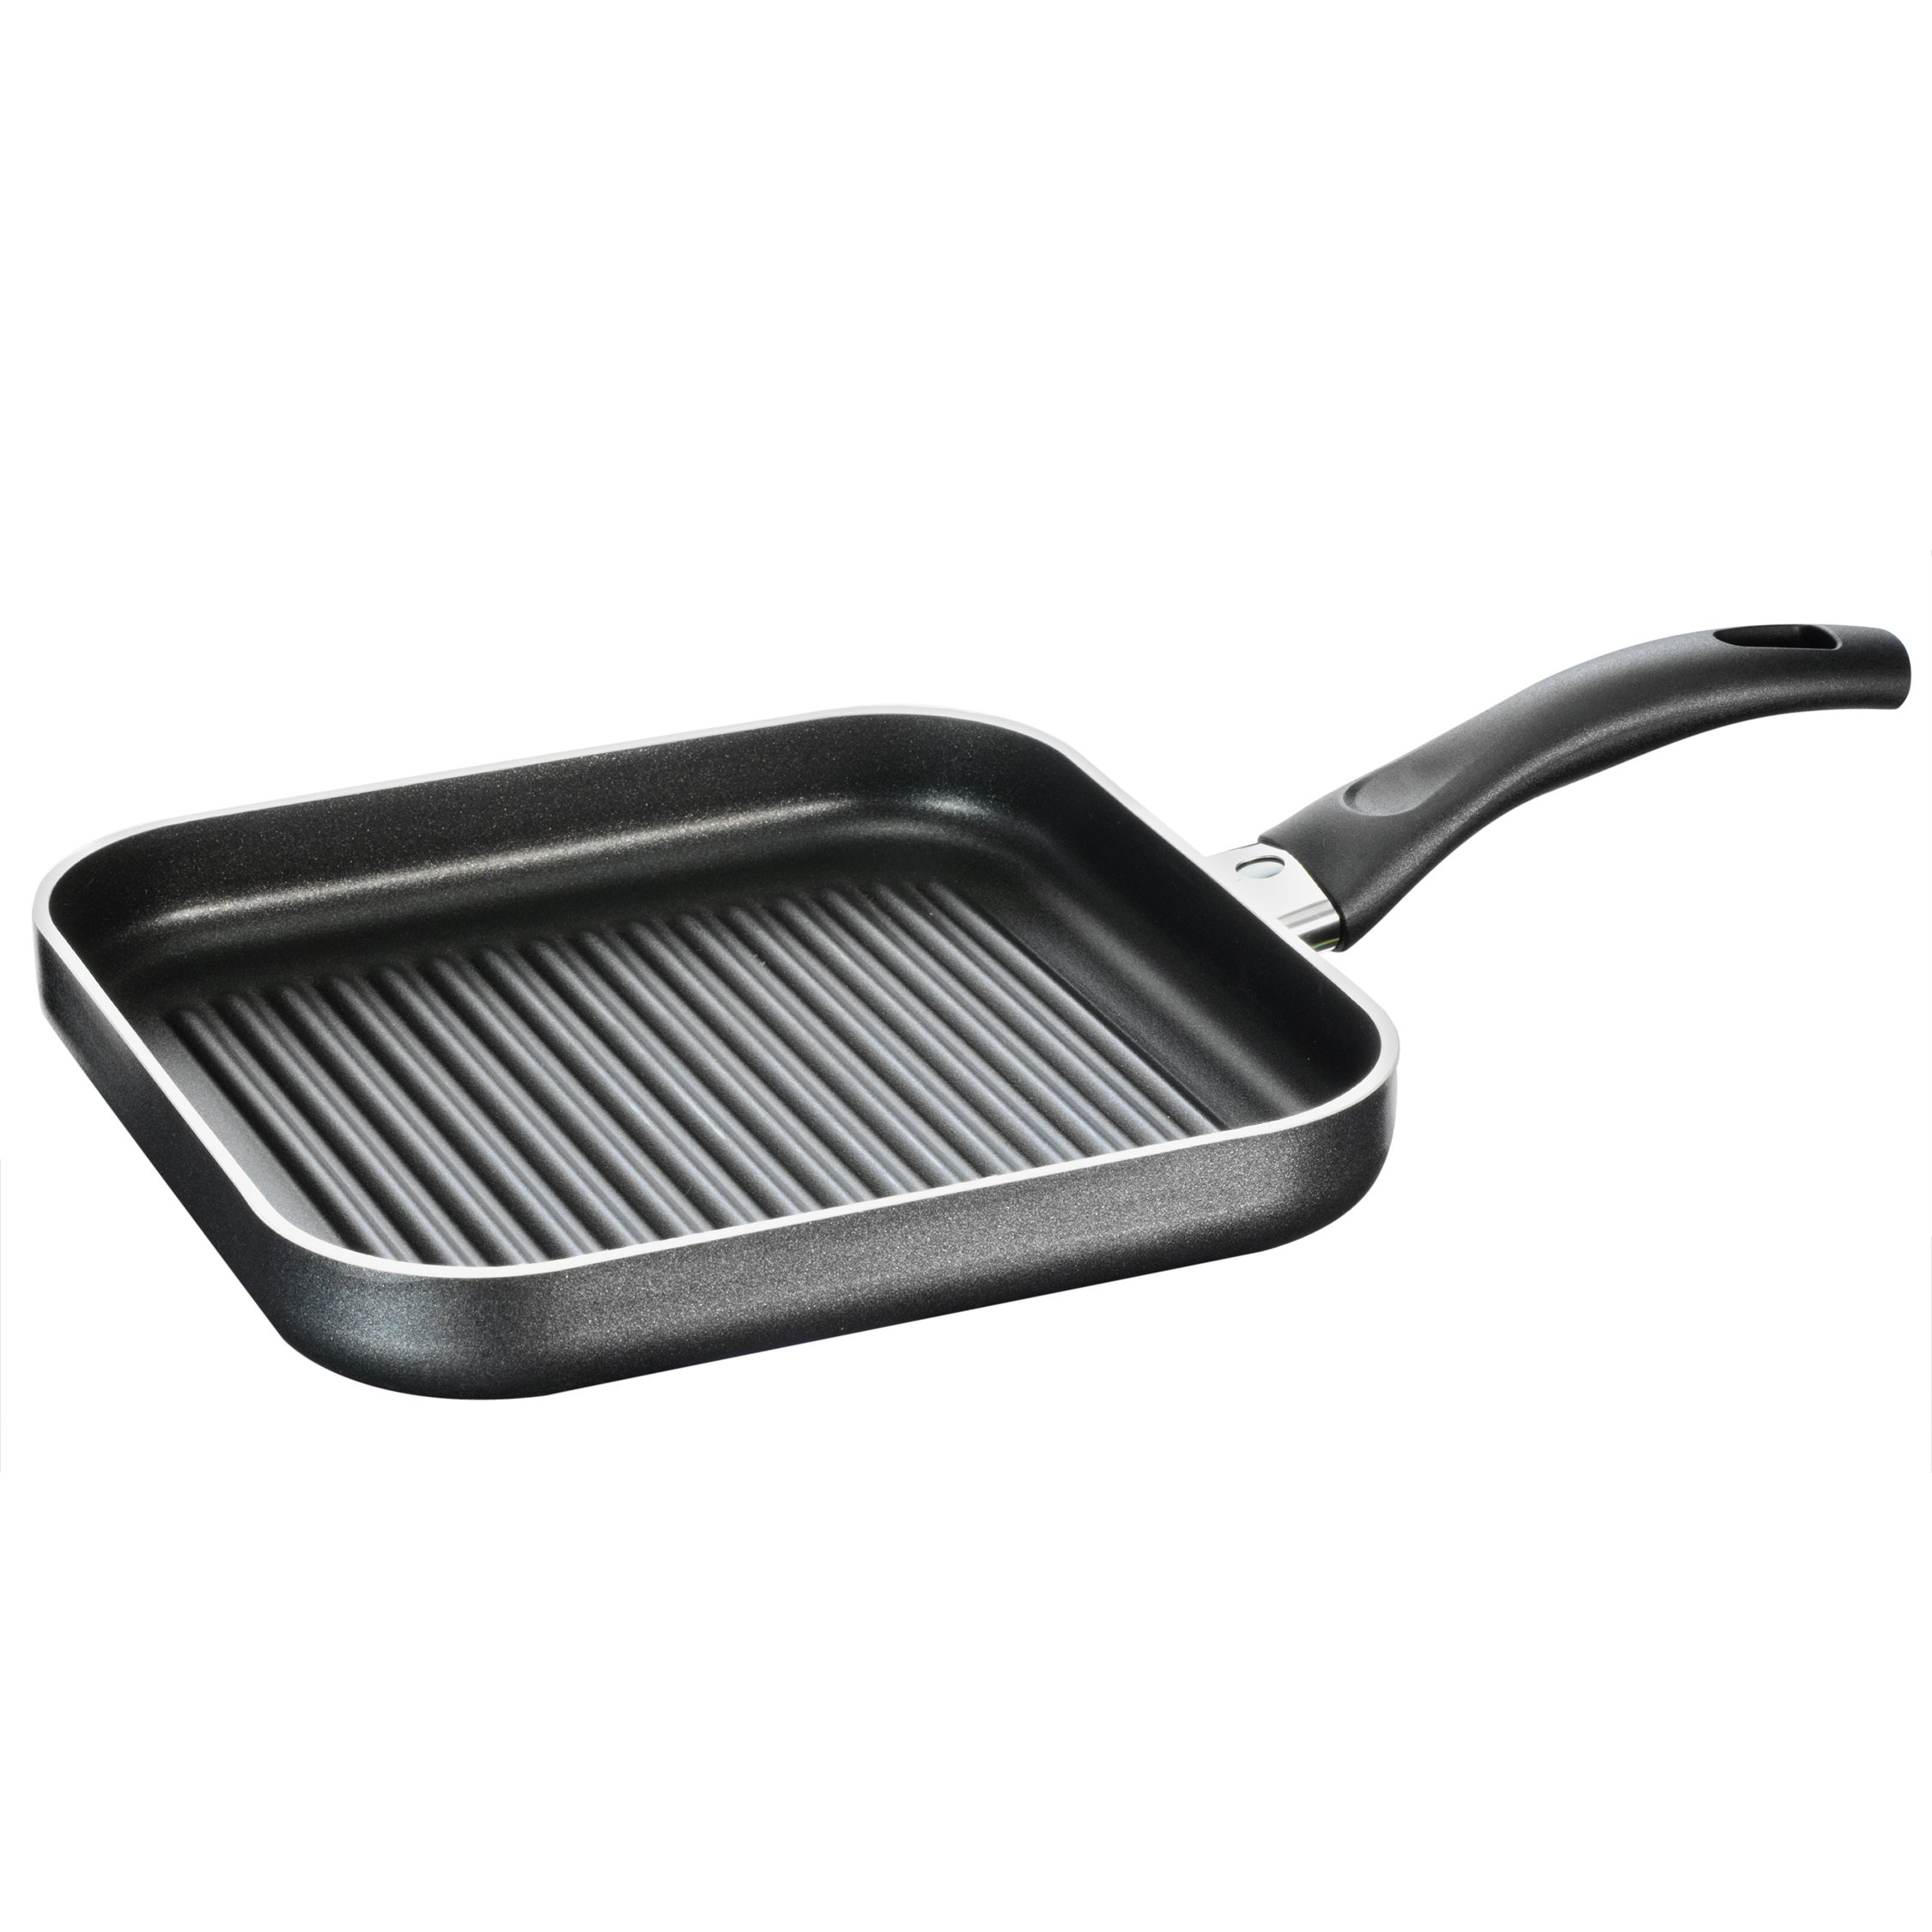 John Lewis Thermopoint Grill Pan, 27cm